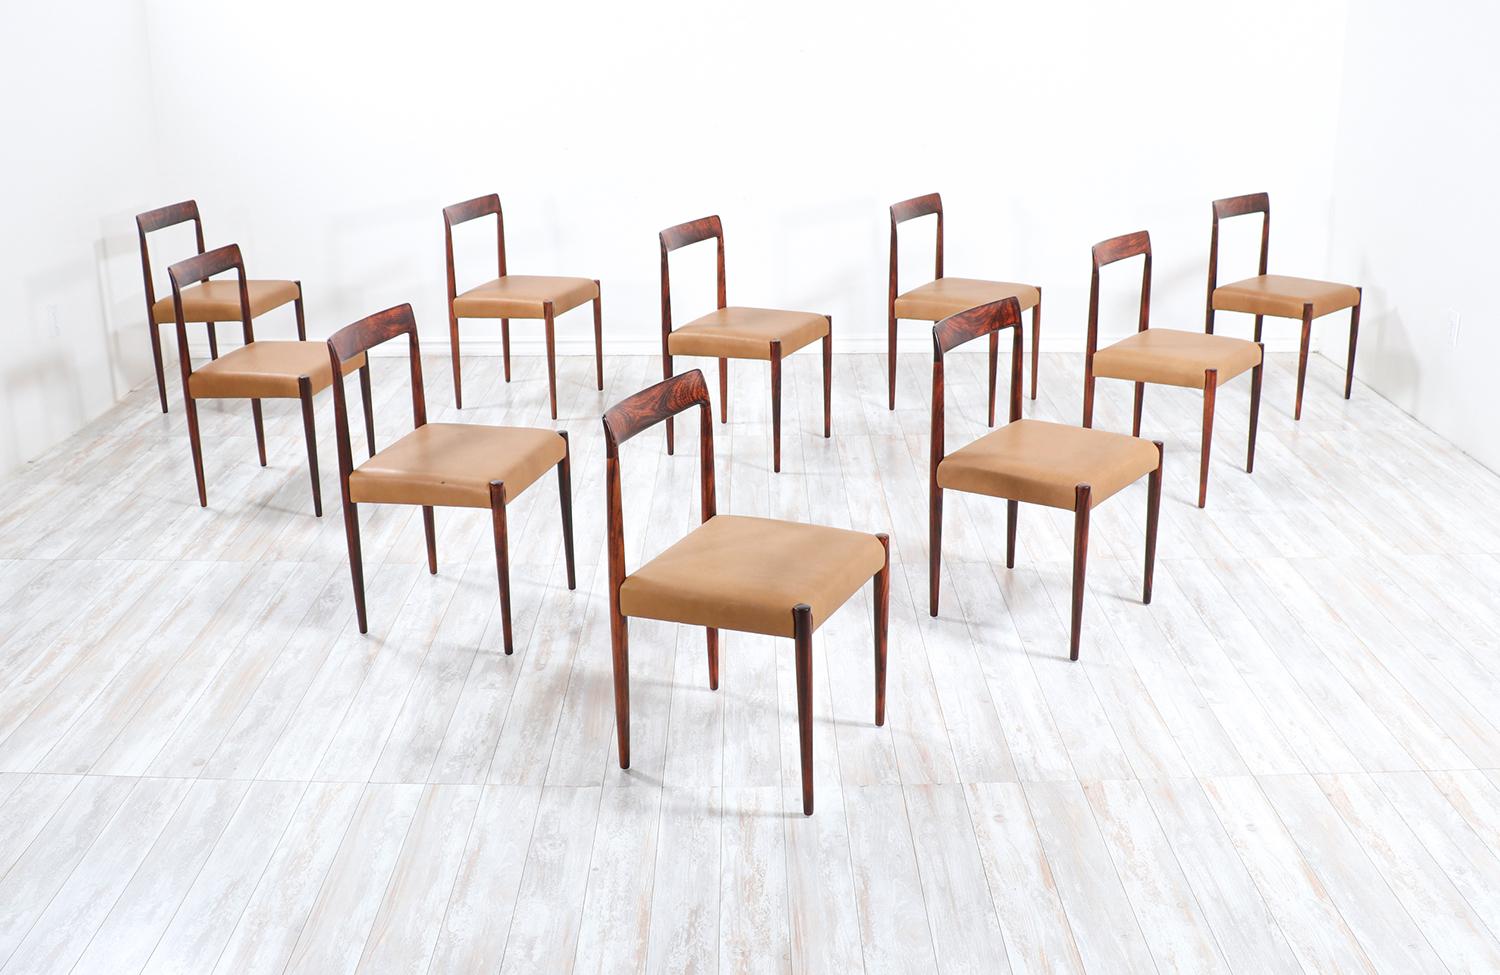 Set of 10 Mid-Century Modern rosewood and leather dining chairs by Lübke.